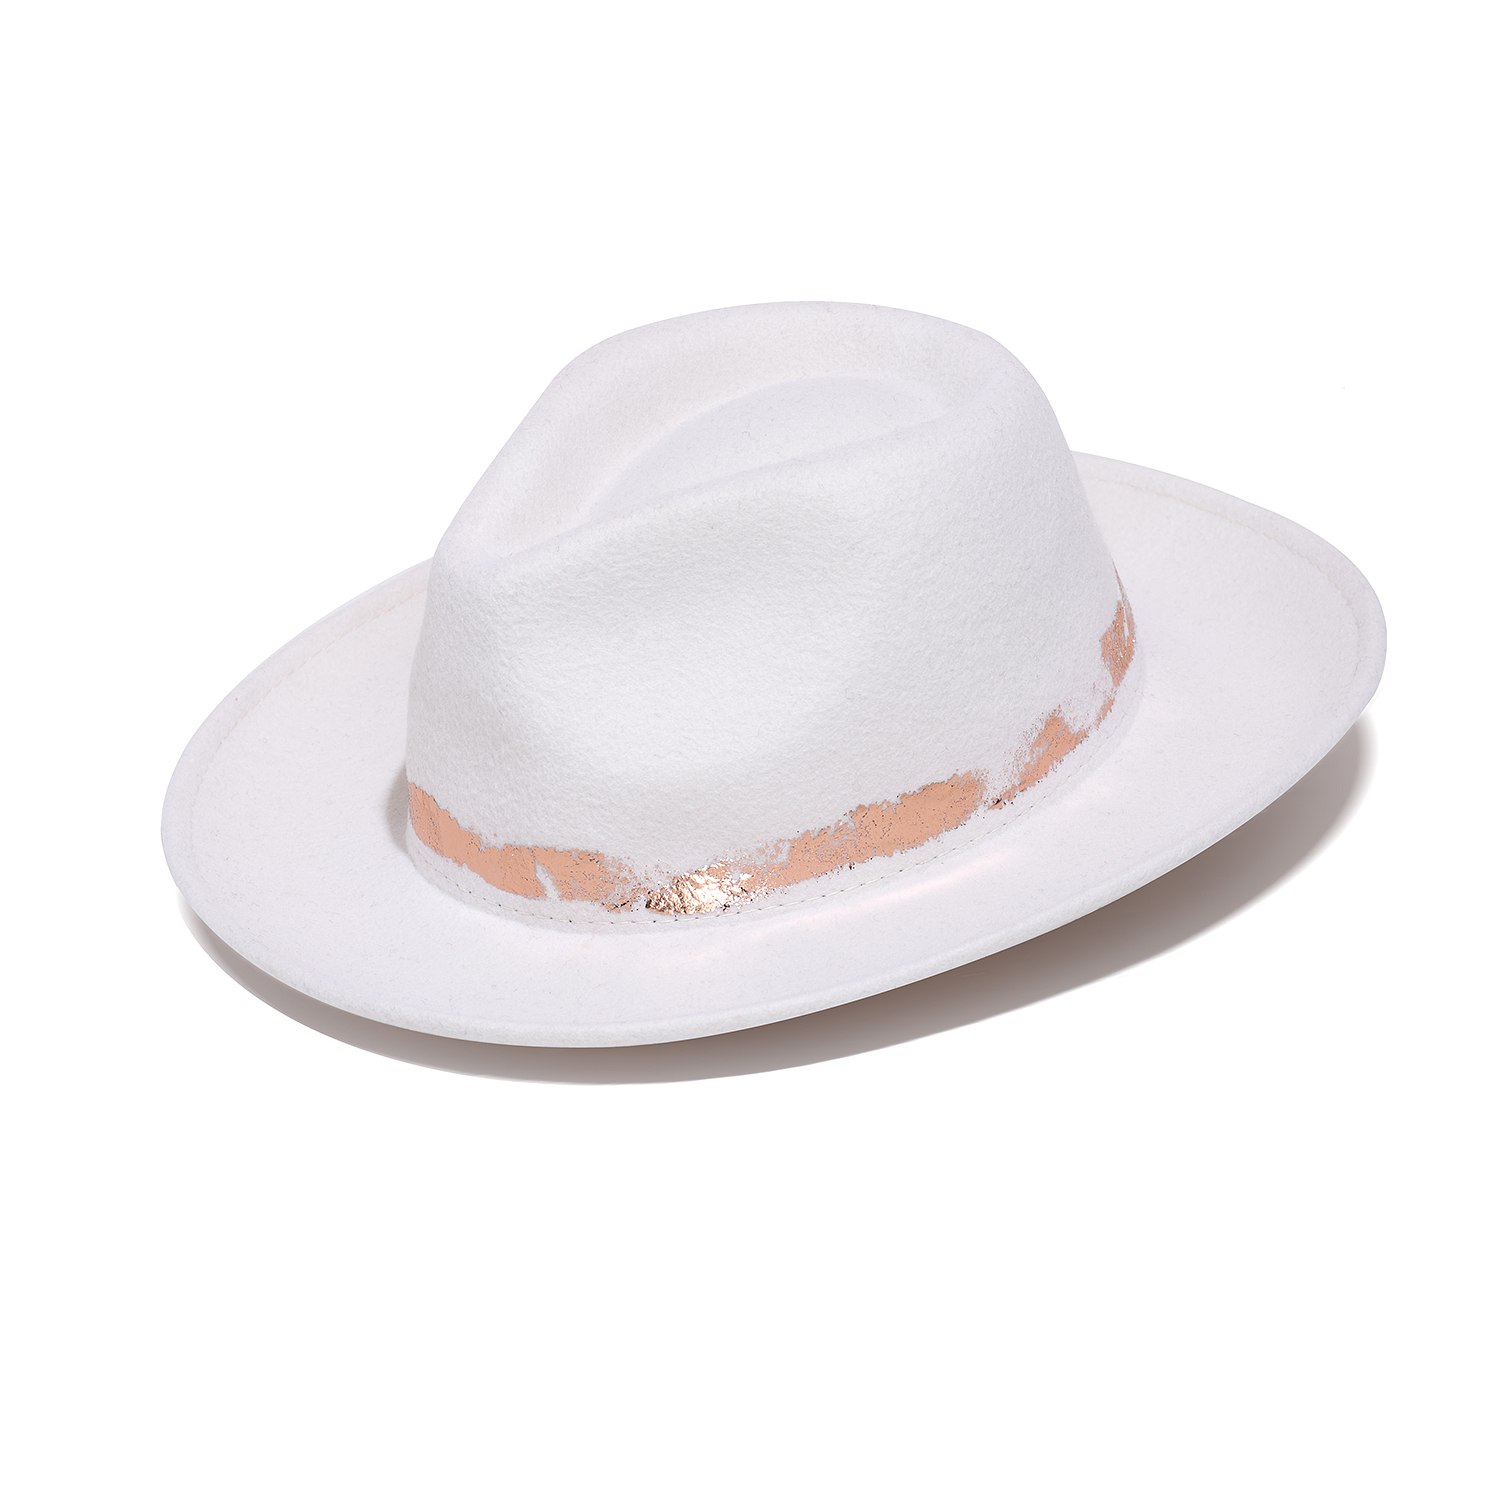 Women’s White Elegant Fedora Hat With Golden Foil Print Extra Large Justine Hats